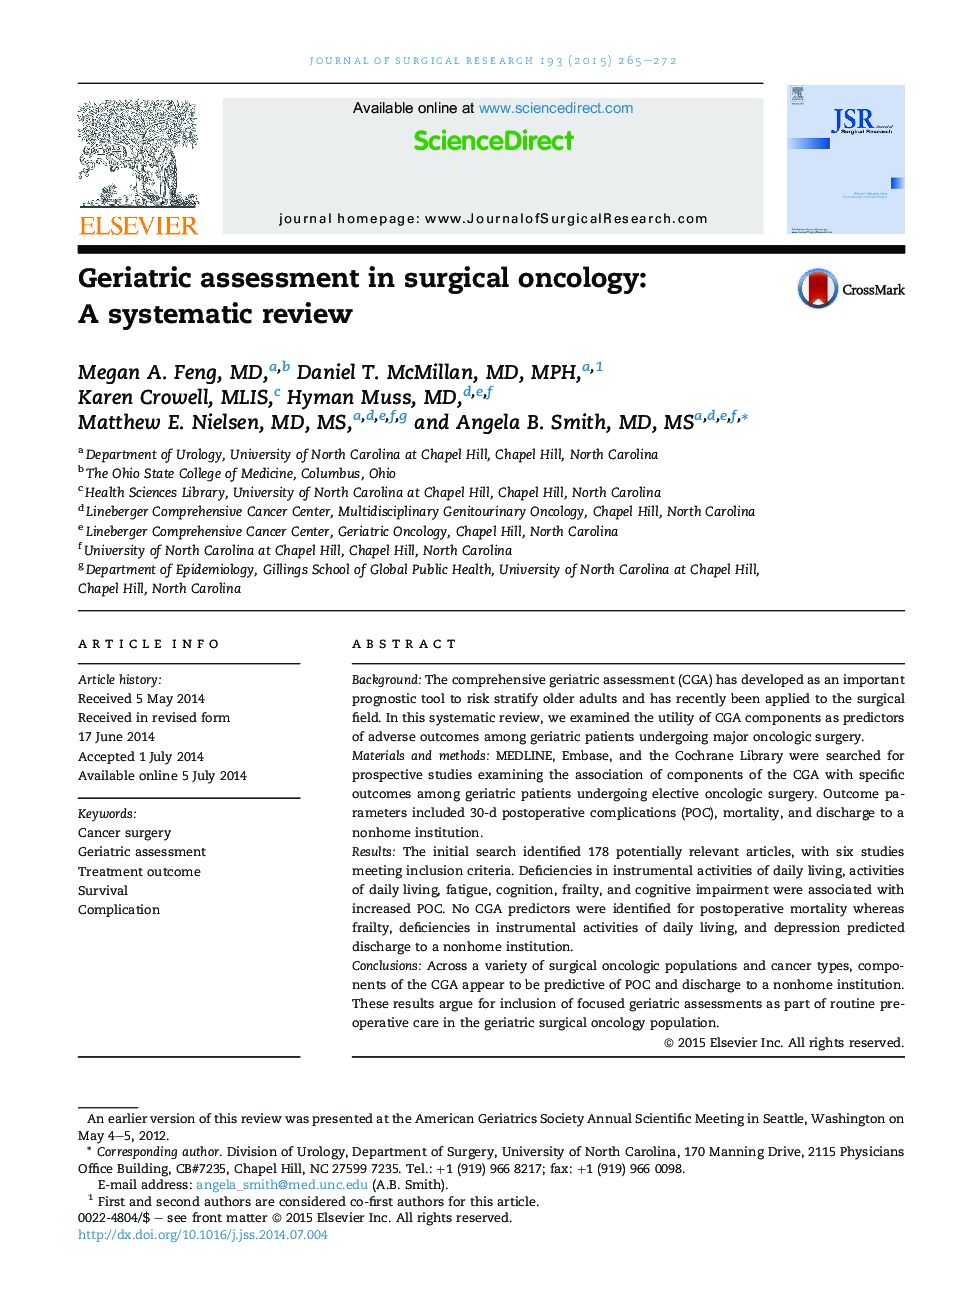 Oncology/EndocrineGeriatric assessment in surgical oncology: A systematic review